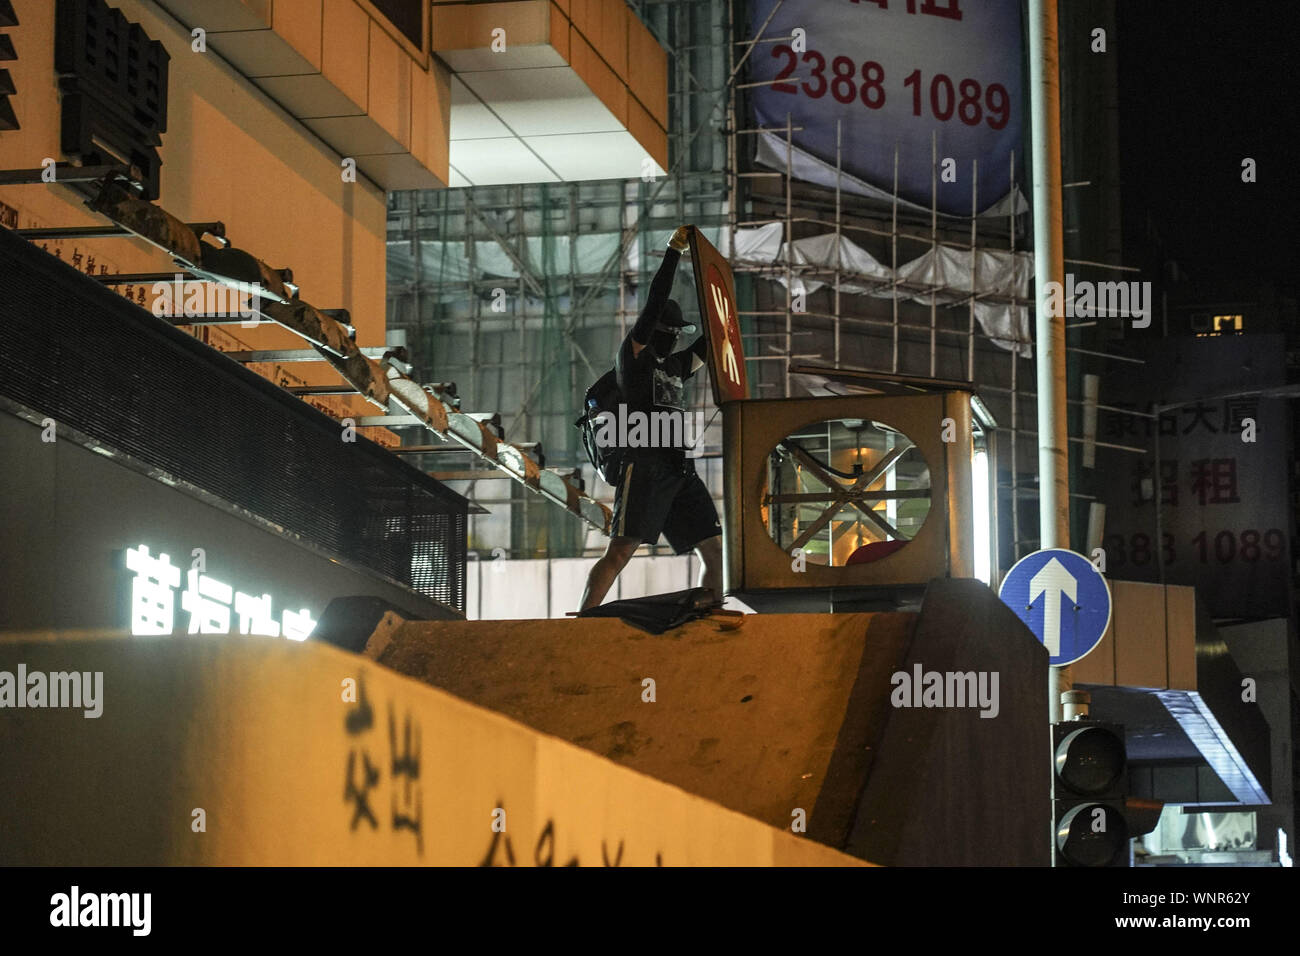 Kowloon, Hong Kong. 6th Sep, 2019. Protesters breaks subway sign at Yau Ma Tei Metro Station on Friday September 6, 2019 in Mong Kok Town Kowloon, Hong Kong.Thousands of protestors gathered outside of Mong Kok police station and around that area to protest the police violence against citizens of Hong Kong.Protesters Moved Nathan Rd to south, destroying surveillance cameras, street signs, building barricades with wooden panes and garbages then set on fire as they move on.9/6/2019.Kowloon, Hong Kong. Credit: ZUMA Press, Inc./Alamy Live News Stock Photo